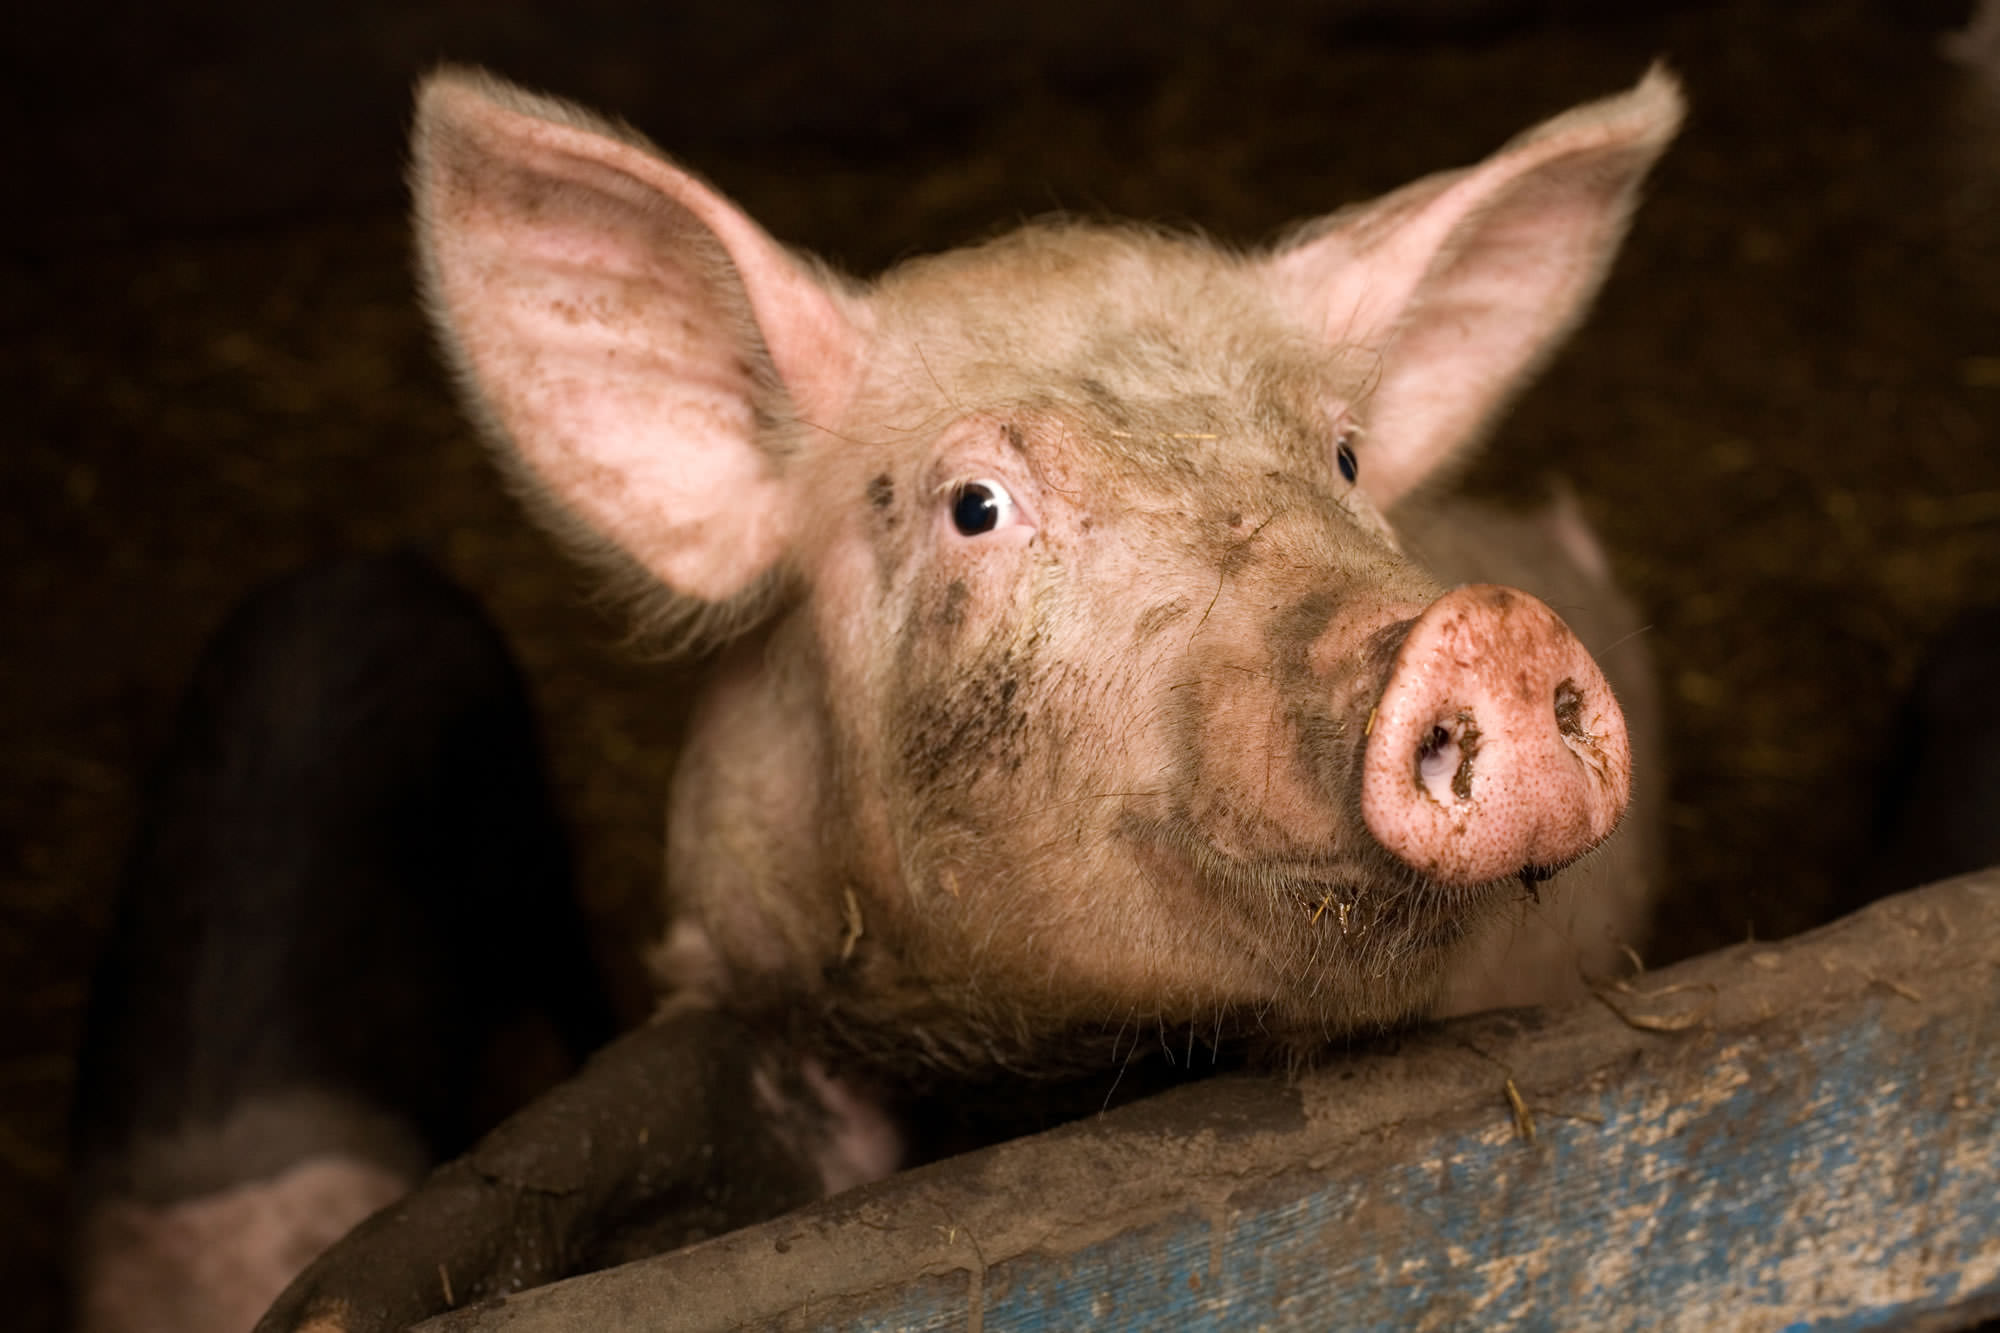 Project Pig | Compassion in World Farming